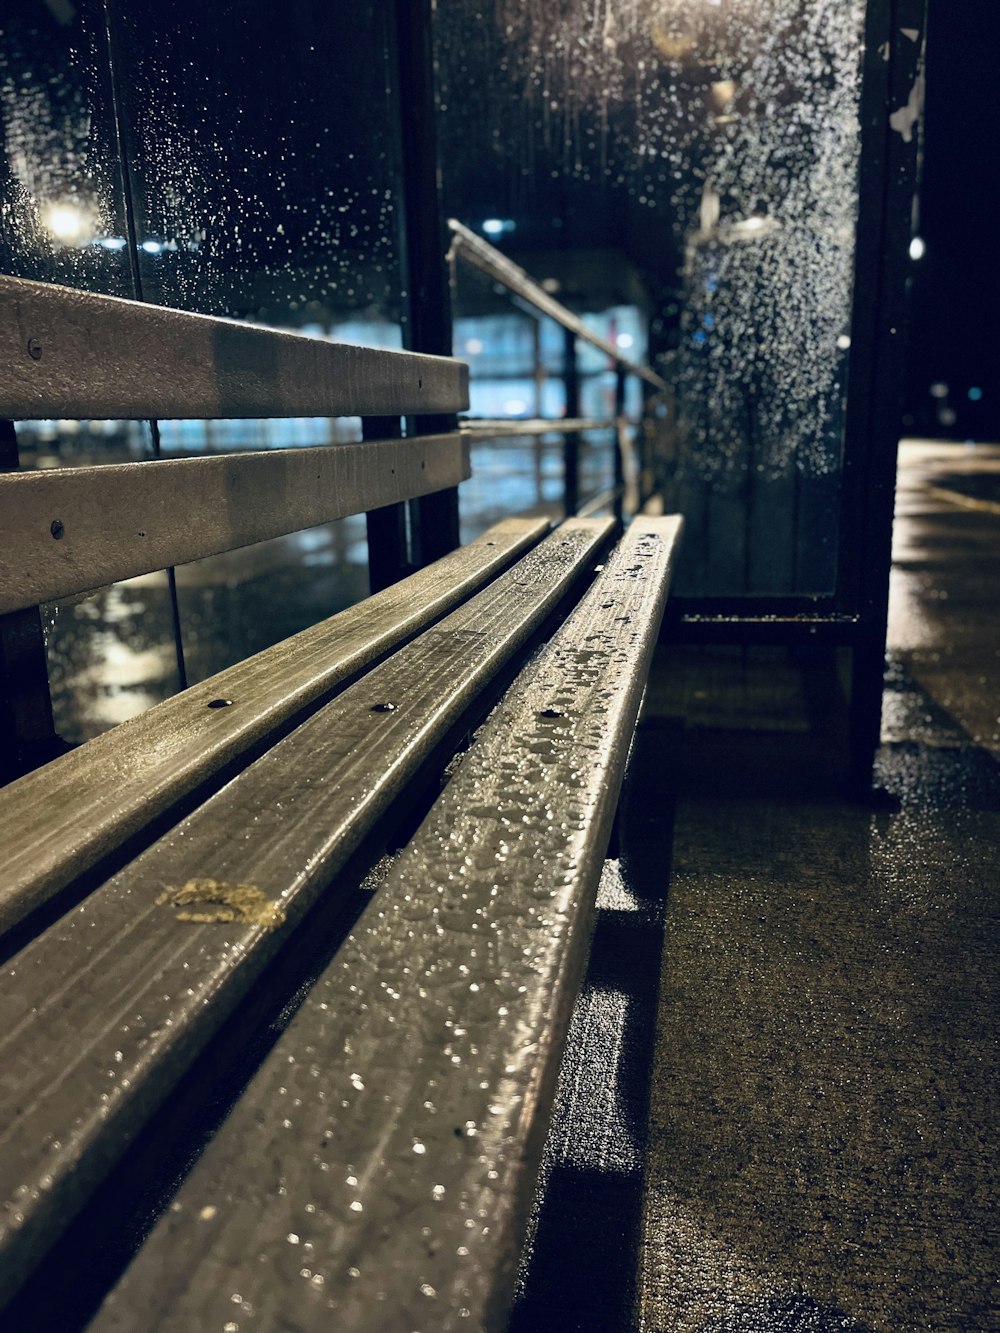 a wooden bench sitting next to a window covered in rain